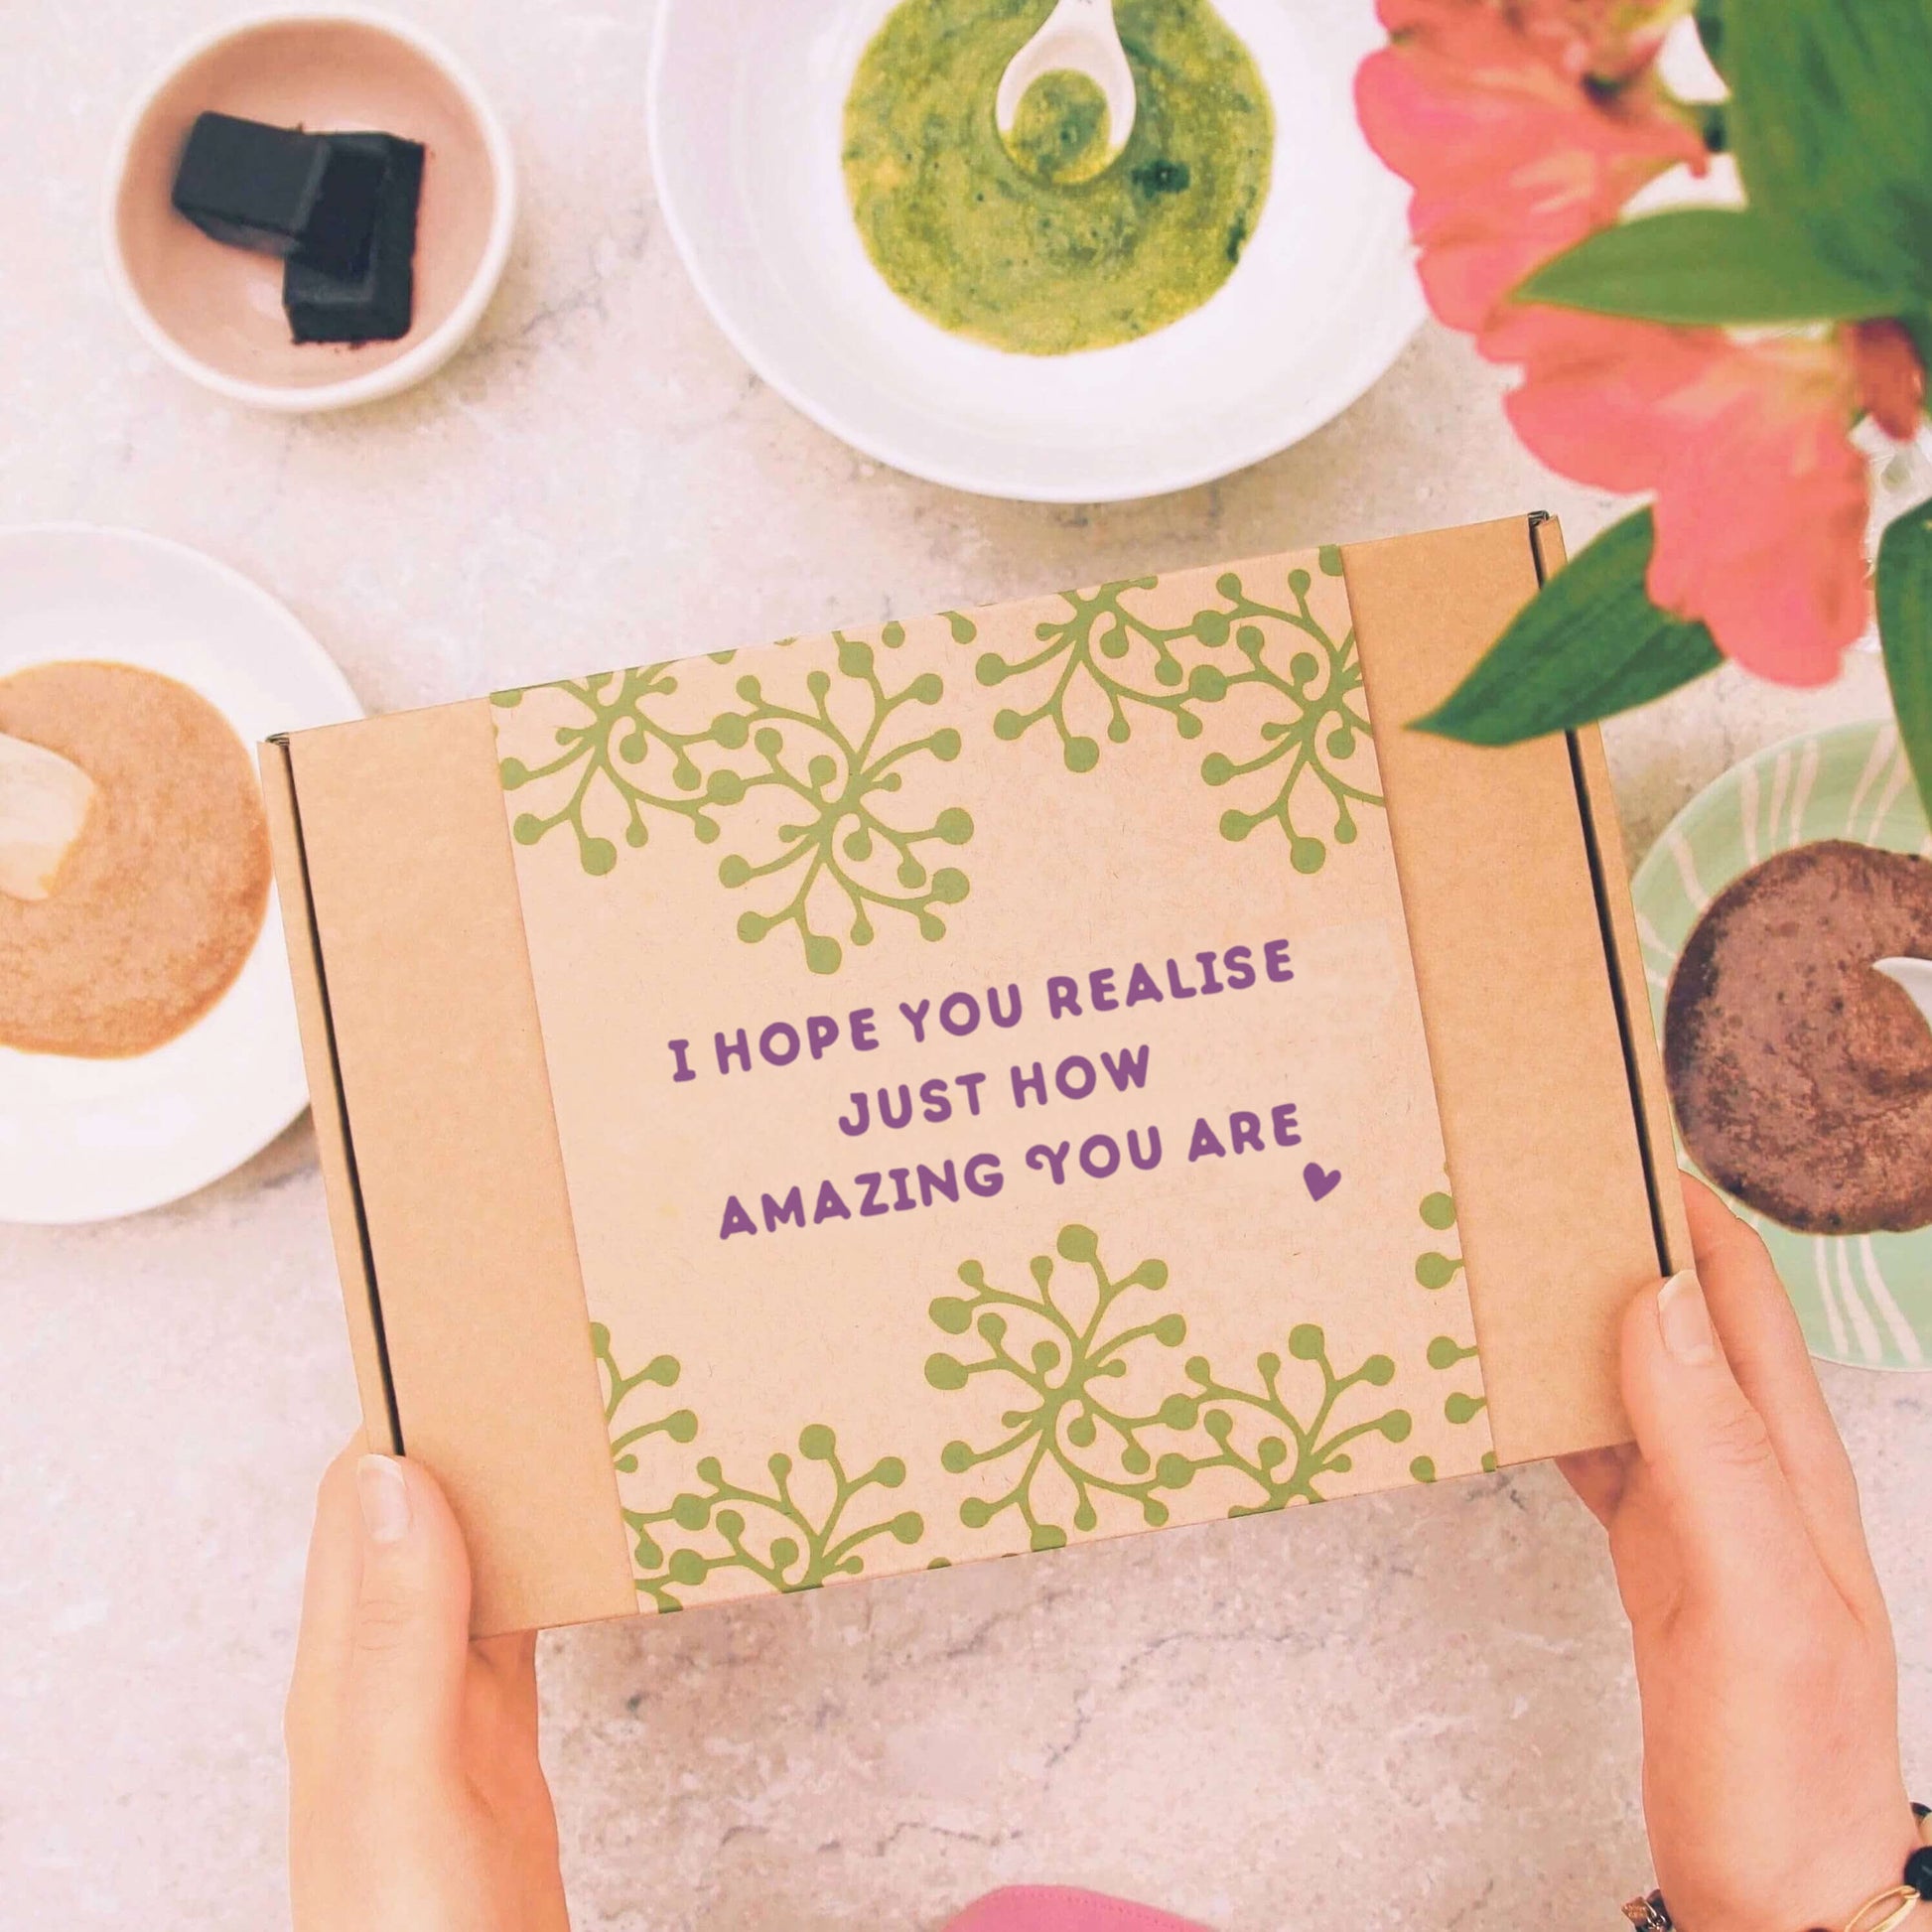 you are amazing letterbox gift with gift message 'i hope you realise just how amazing you are'